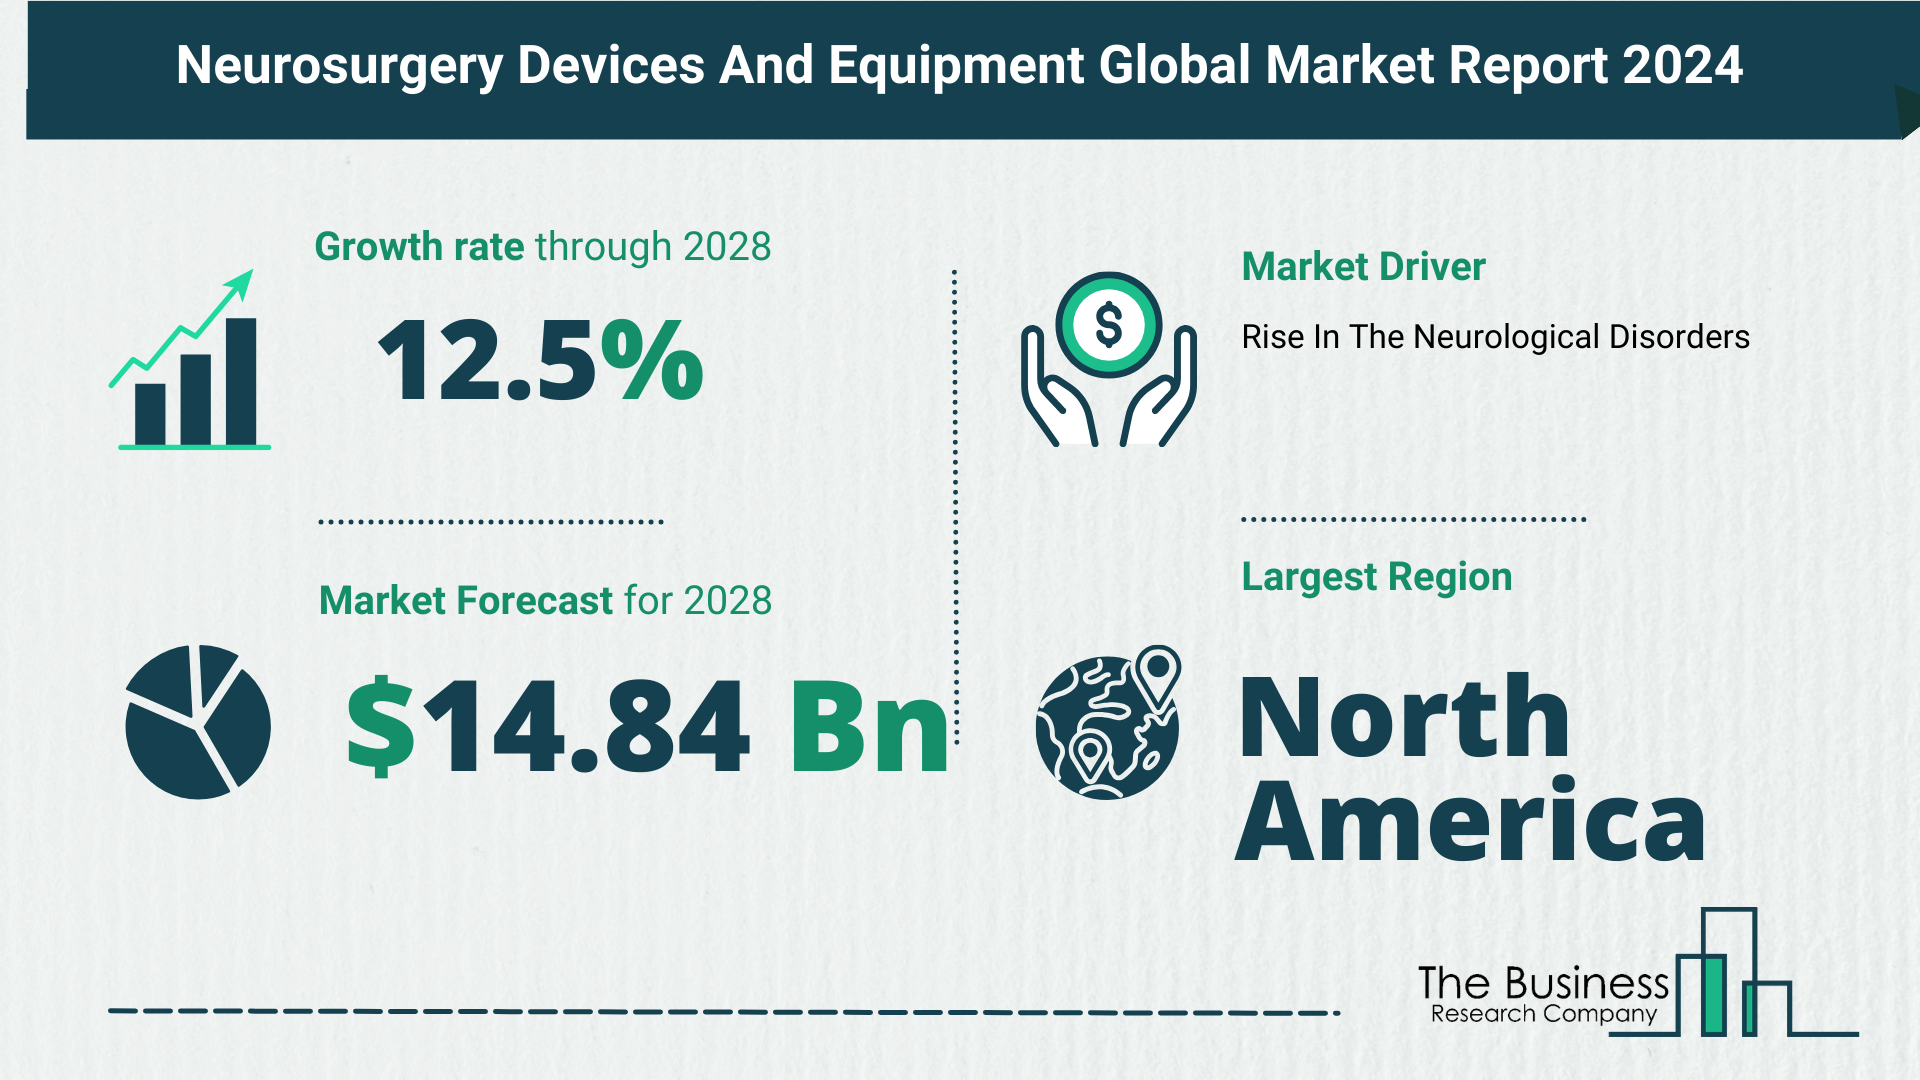 Global Neurosurgery Devices And Equipment Market